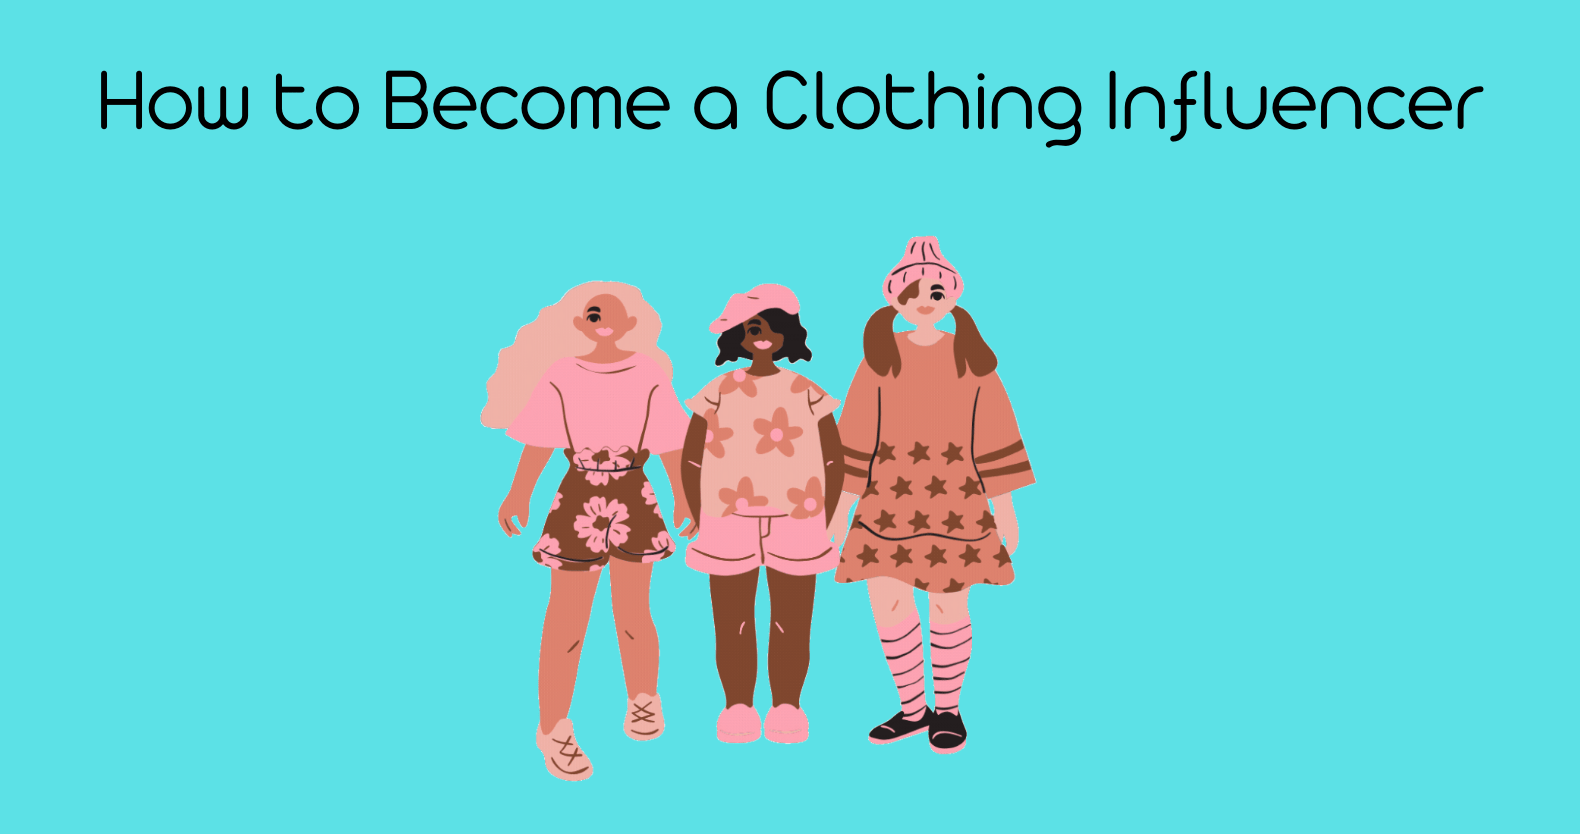 How to Become a Clothing Influencer